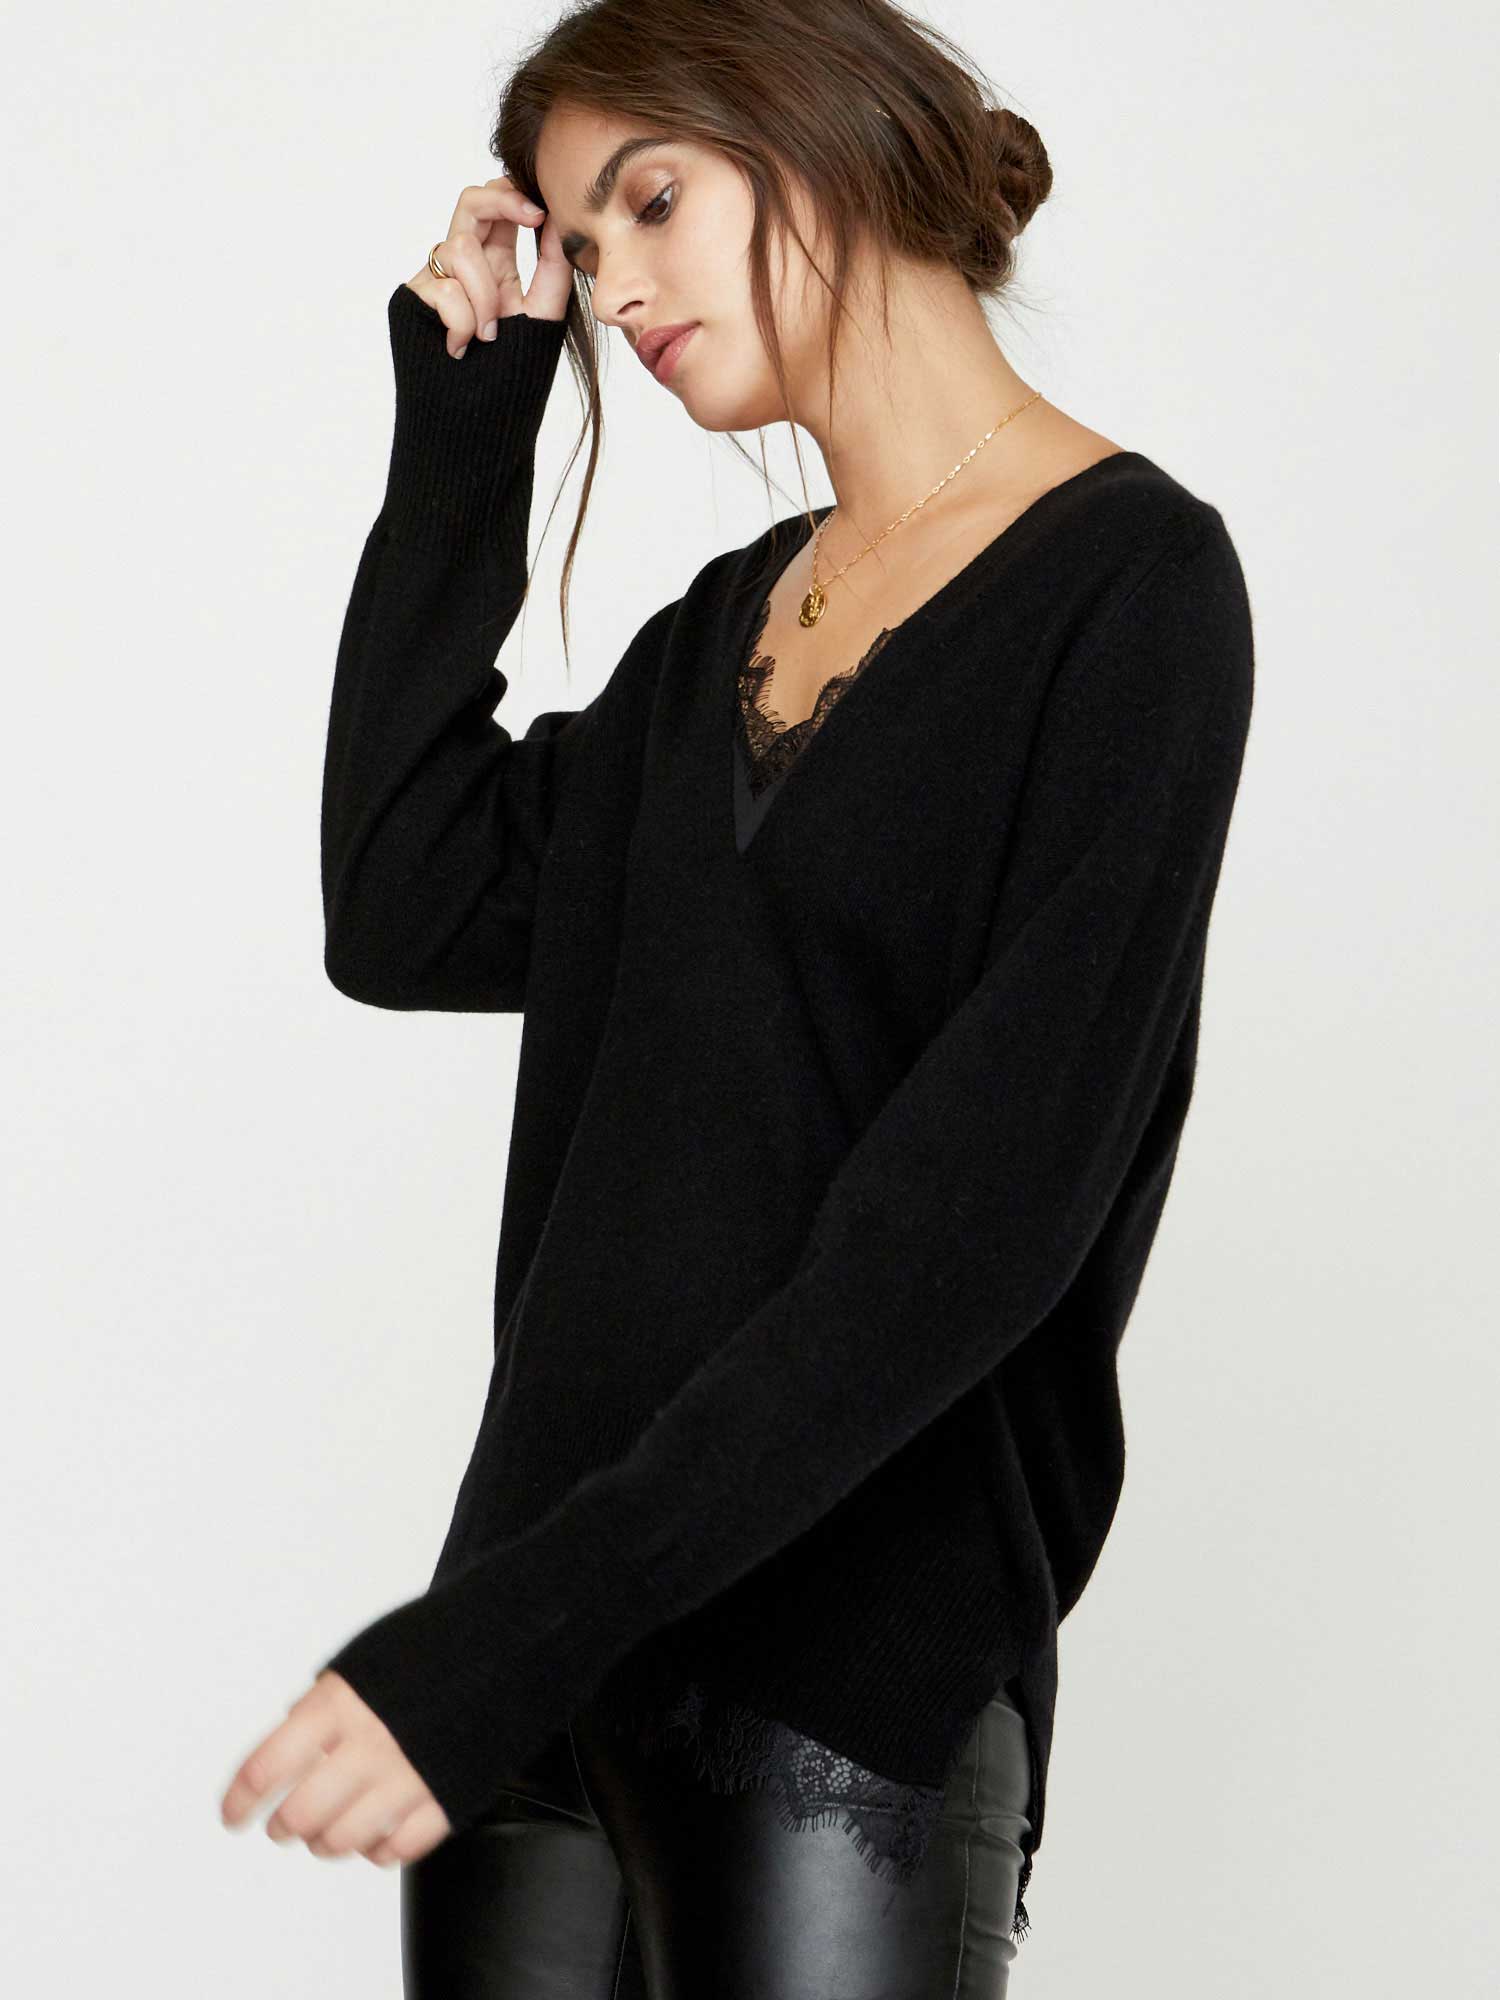 Black lace layered v-neck sweater side view